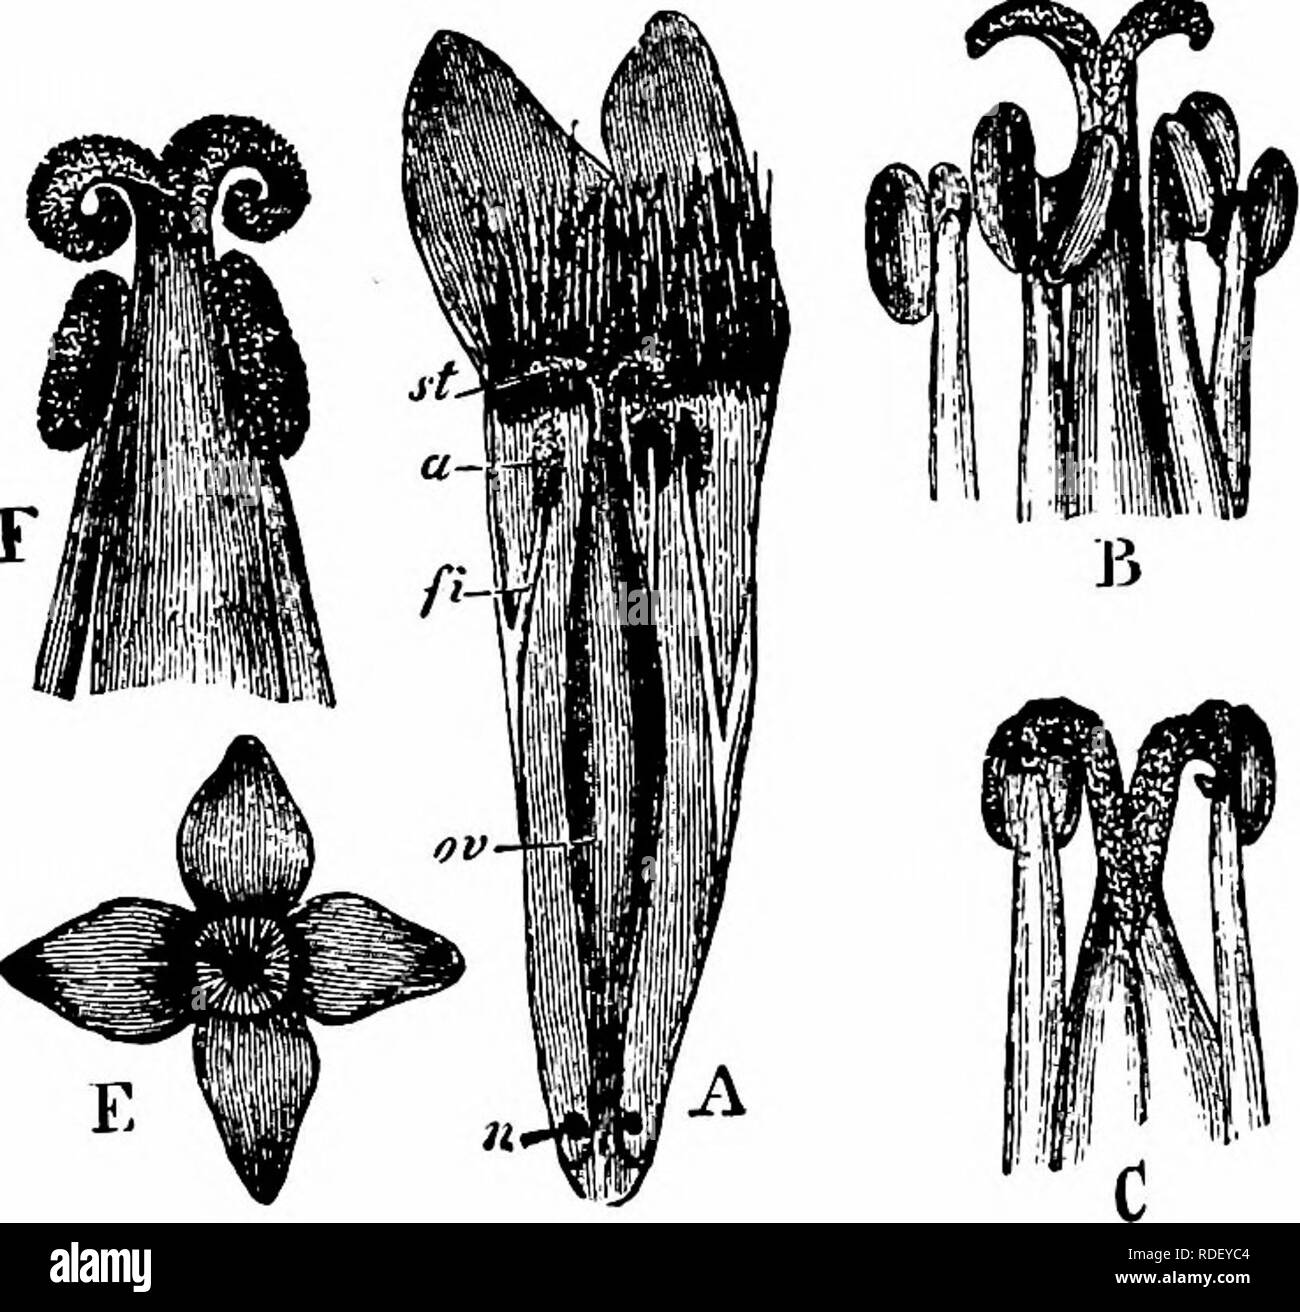 . Handbook of flower pollination : based upon Hermann Mu?ller's work 'The fertilisation of flowers by insects' . Fertilization of plants. io6 ANGIOSPERMAE—DICOTYLEDONES Blomn. o. Befrukt.'; Warming, ' Arkt. Vaxt. Biol.,' p. 12; Kemer, 'Nat. Hist. PI.,' Eng. Ed. I, II, pp. 366, 391 ; Warnstorf, Verb. bot. Ver., Berlin, xxxvii, 1896.) — This species bears humble-bee Lepidopterid flowers. Hermann Miiller (canton Graubunden), Lindman (Norway), and Wanning (Iceland) describe it as feebly protogynous, afterwards becoming homogamous, while Schulz (Westphalia and Thuringia) observed it to be strongly  Stock Photo